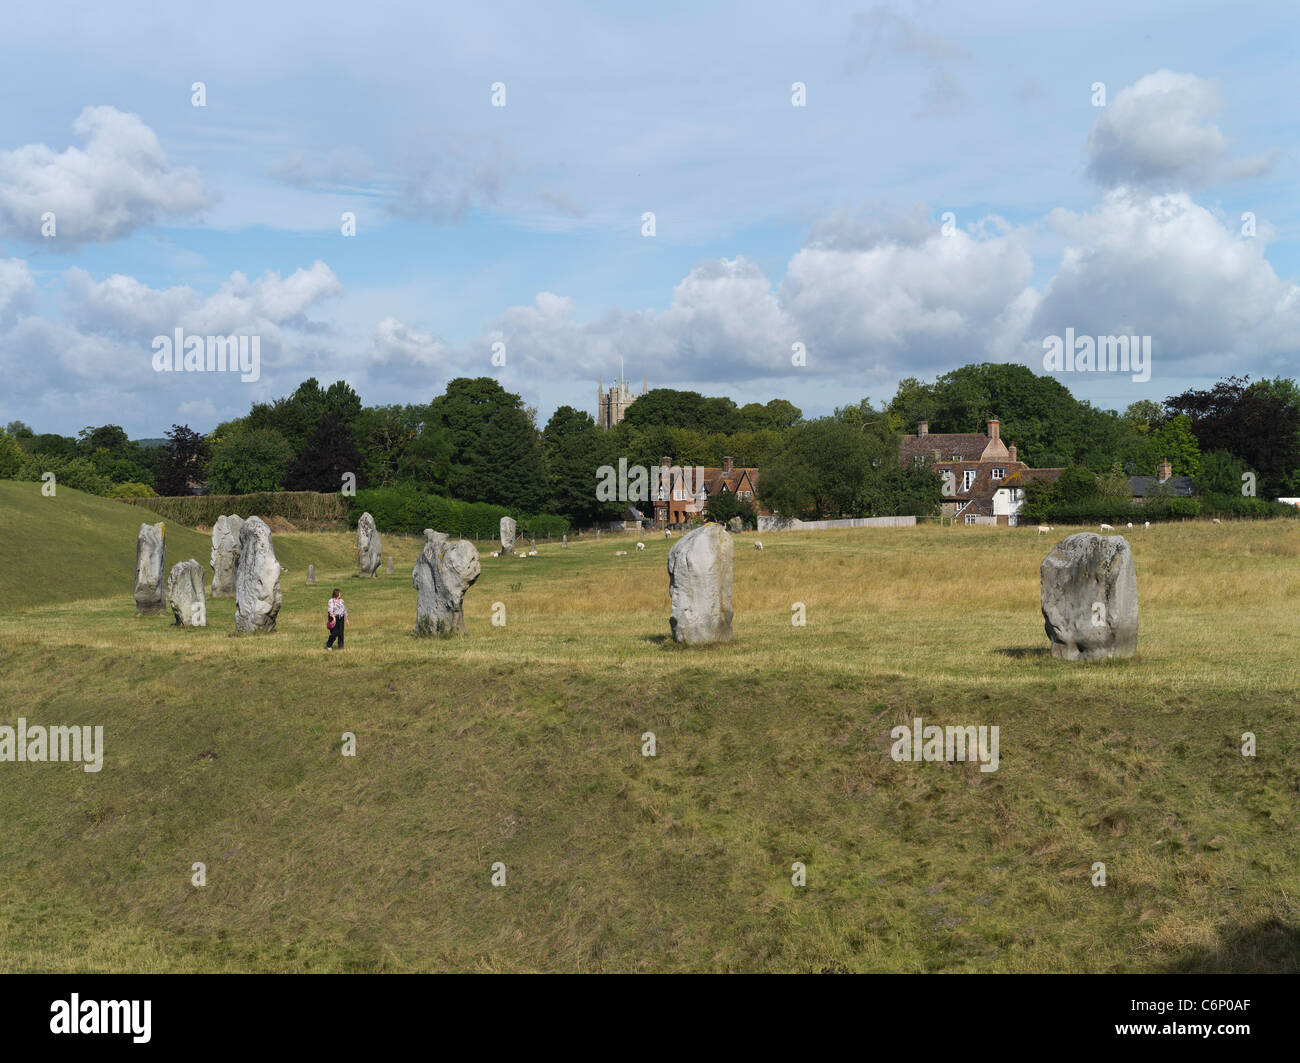 dh Stone Circle AVEBURY WILTSHIRE Tourist walking around megalithic standing stones circle neolithic henge uk person at monument ancient britain Stock Photo